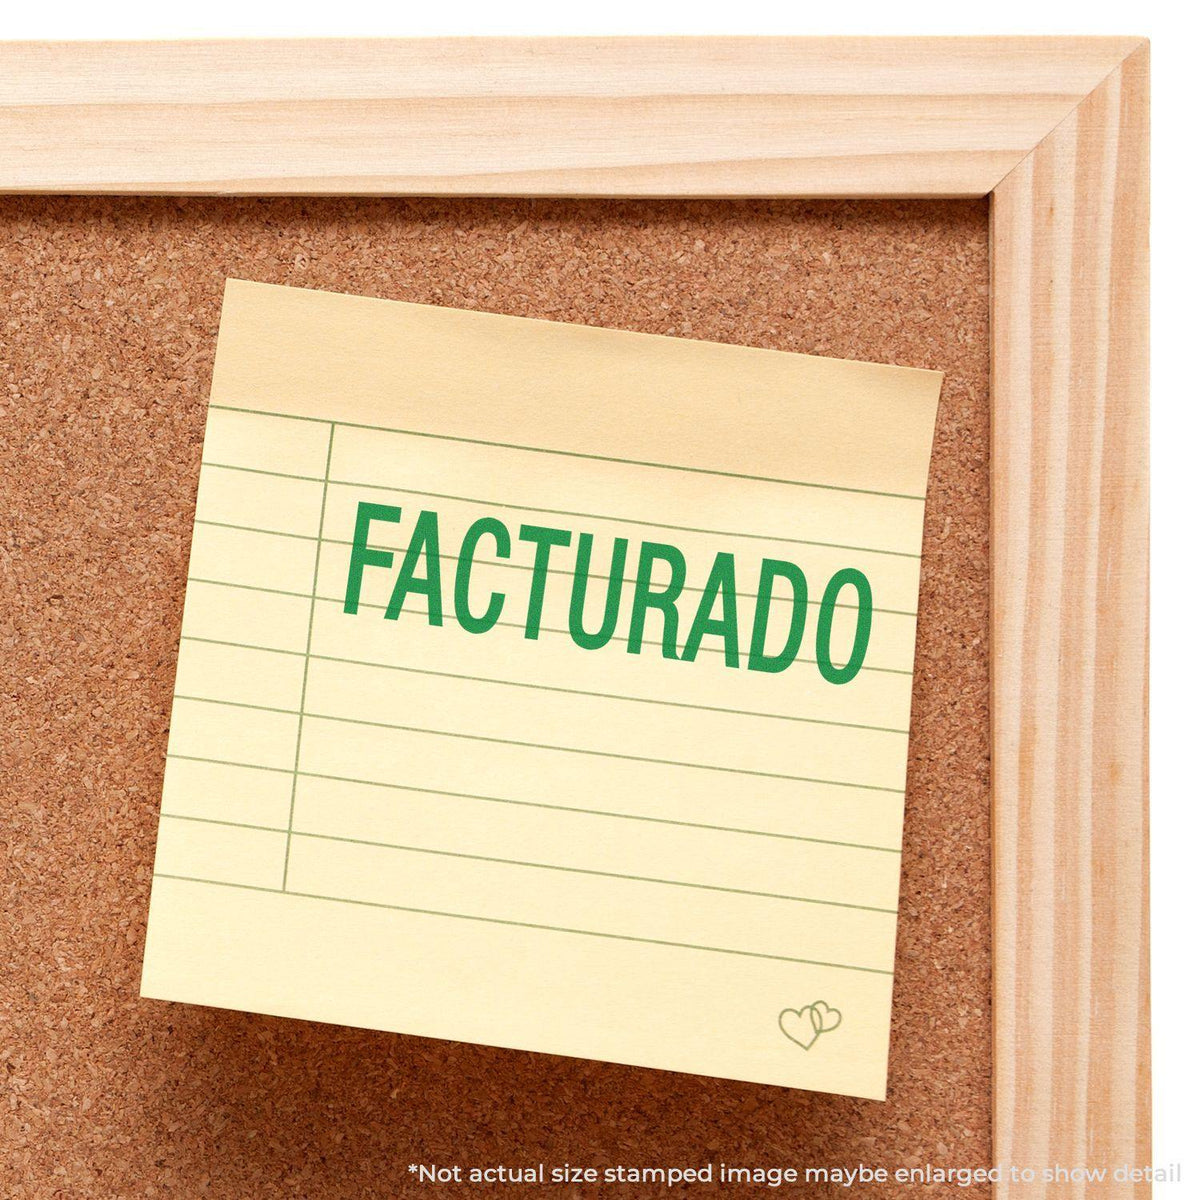 Large Facturado Rubber Stamp In Use Photo